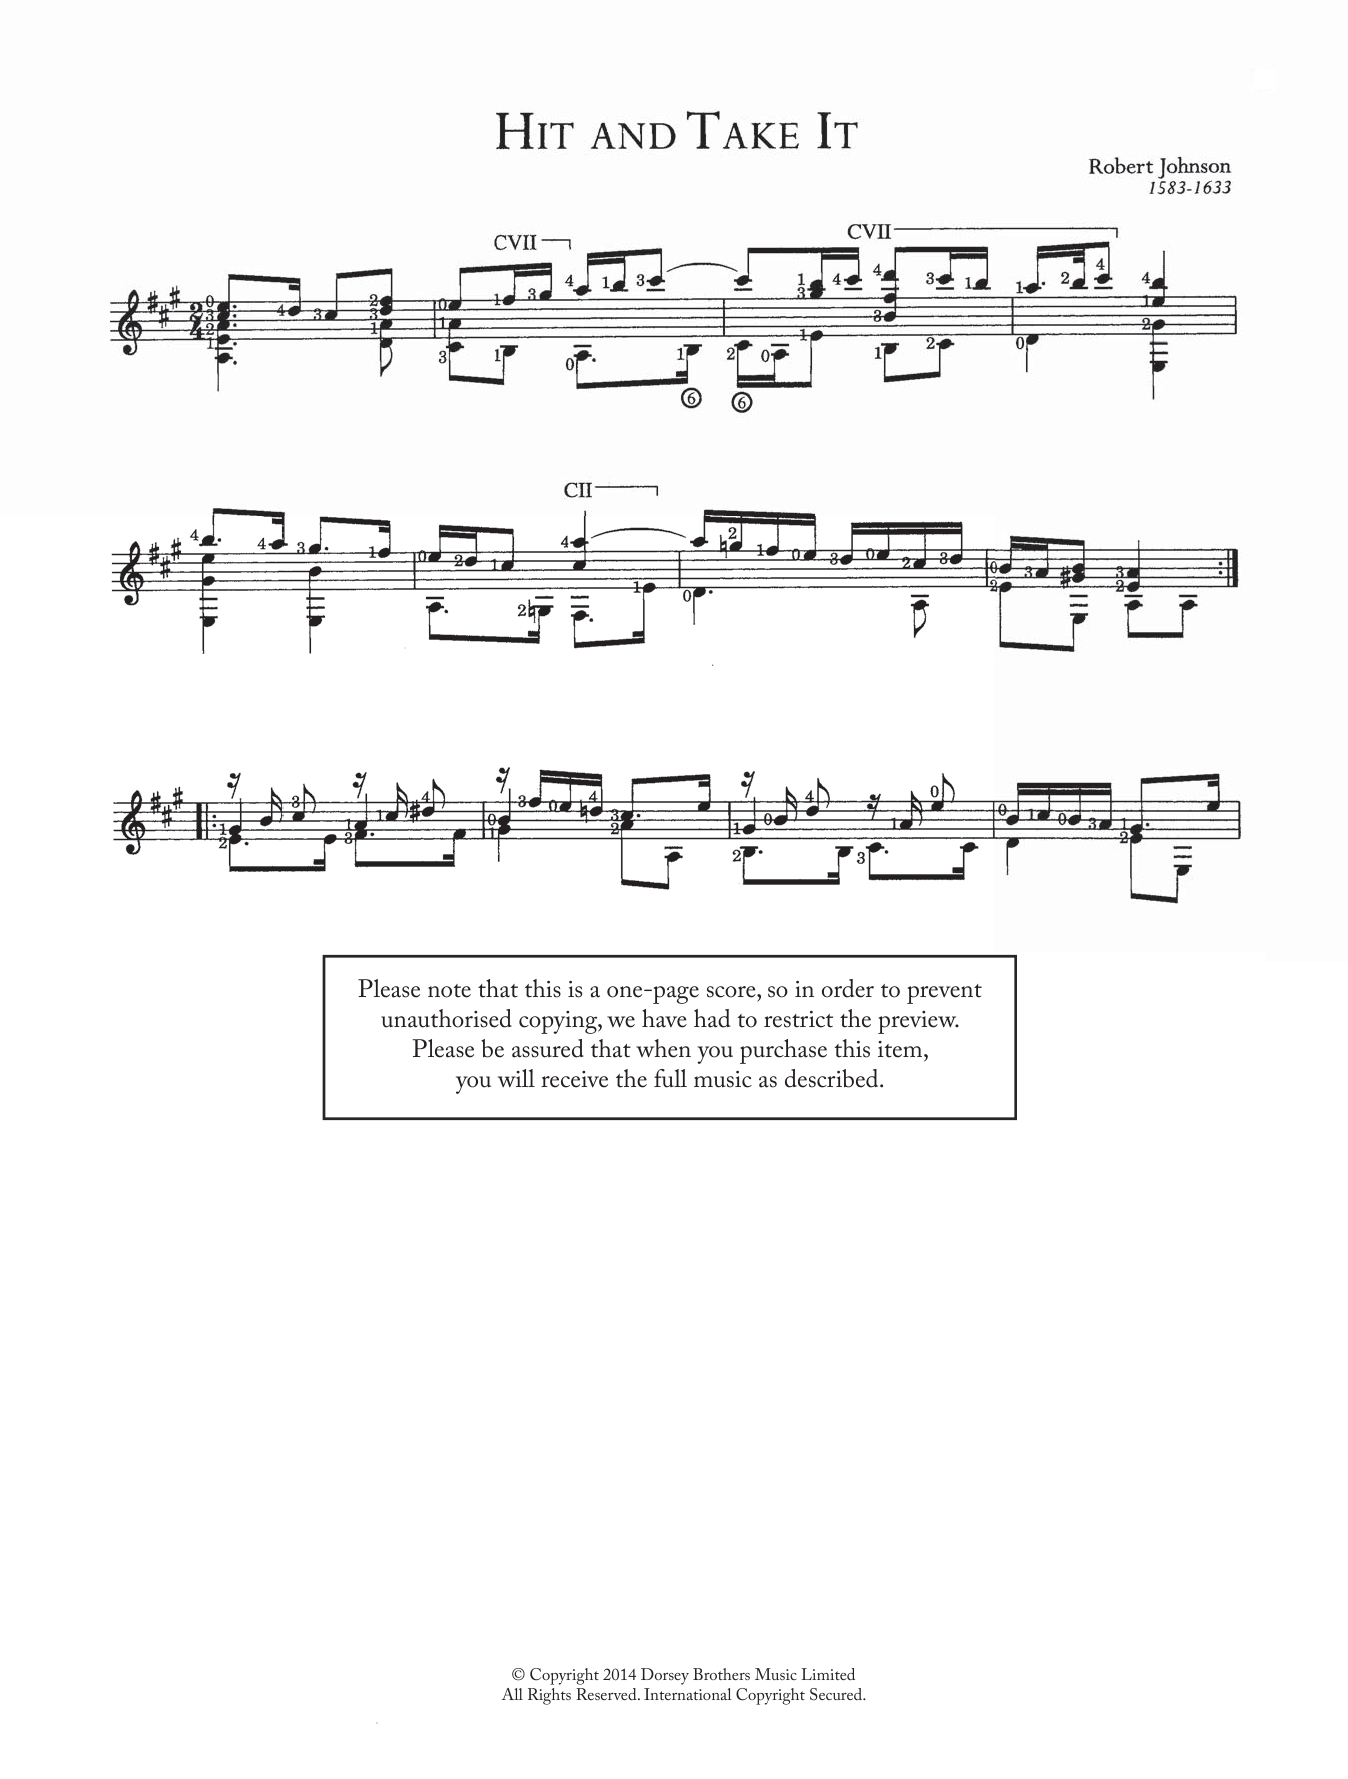 Robert Johnson II Hit And Take It sheet music preview music notes and score for Guitar including 2 page(s)